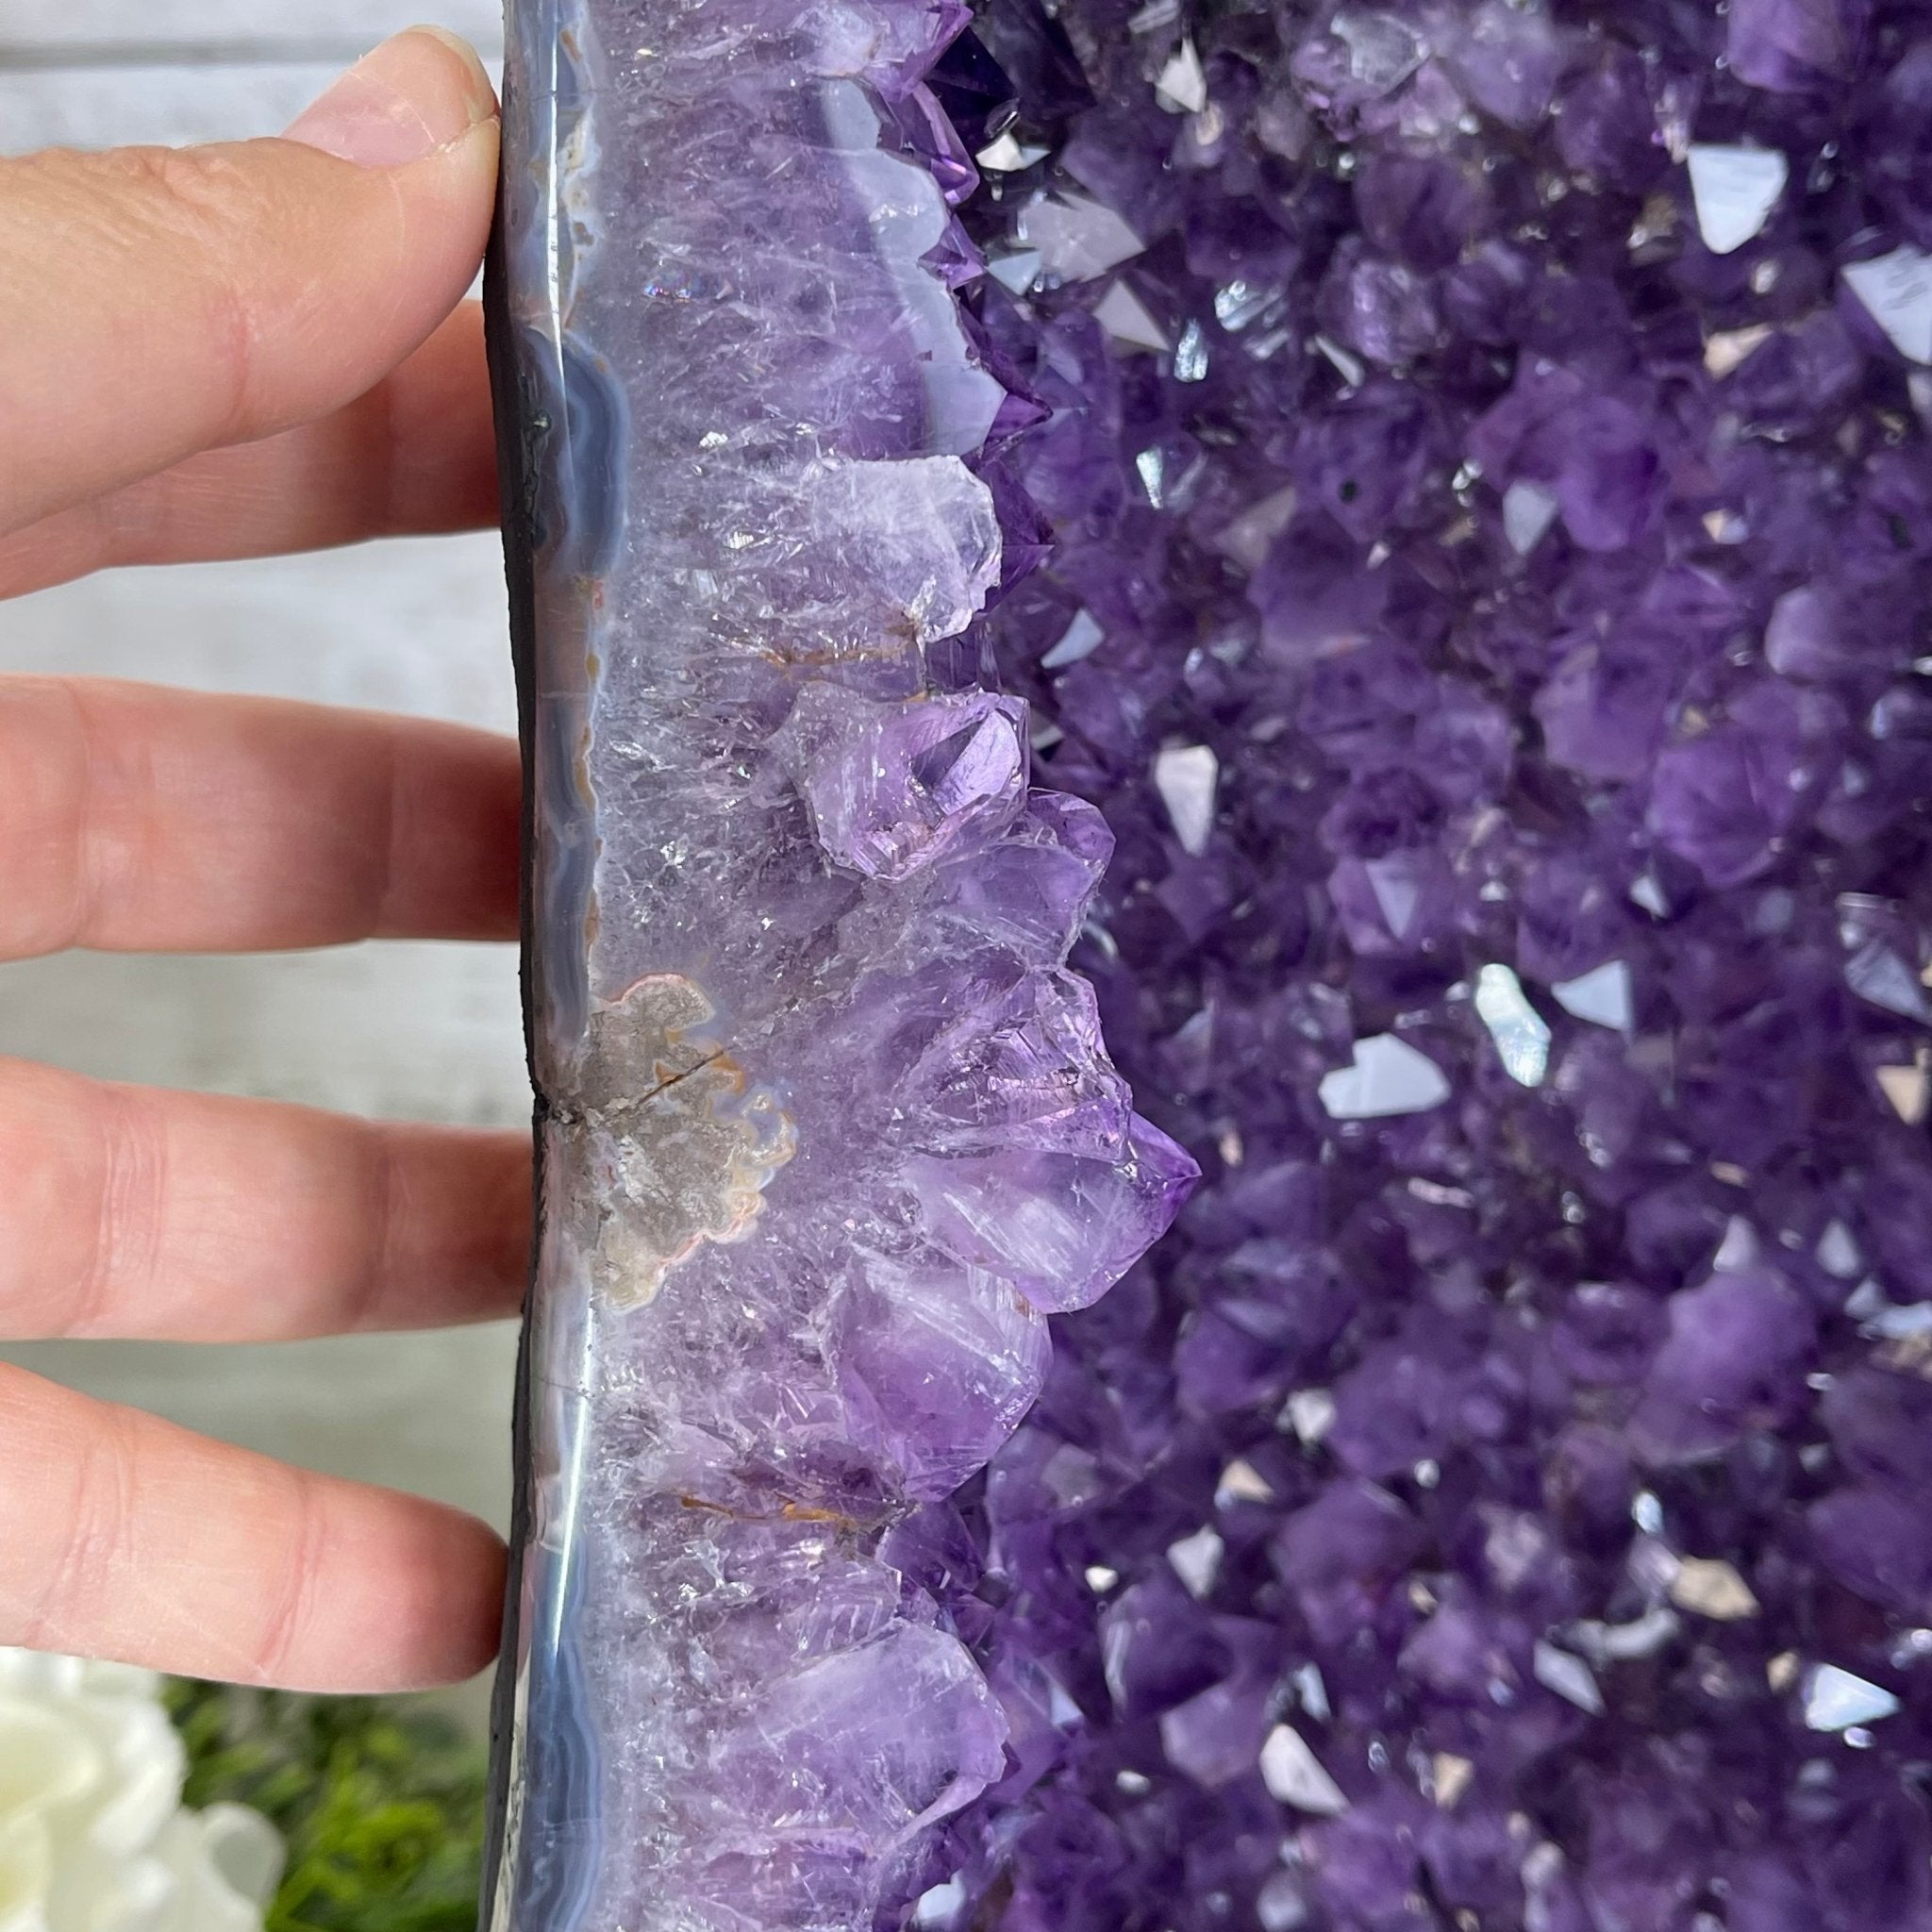 Extra Quality Brazilian Amethyst Cathedral, 47.3 lbs & 17.7" Tall #5601-1128 by Brazil Gems - Brazil GemsBrazil GemsExtra Quality Brazilian Amethyst Cathedral, 47.3 lbs & 17.7" Tall #5601-1128 by Brazil GemsCathedrals5601-1128